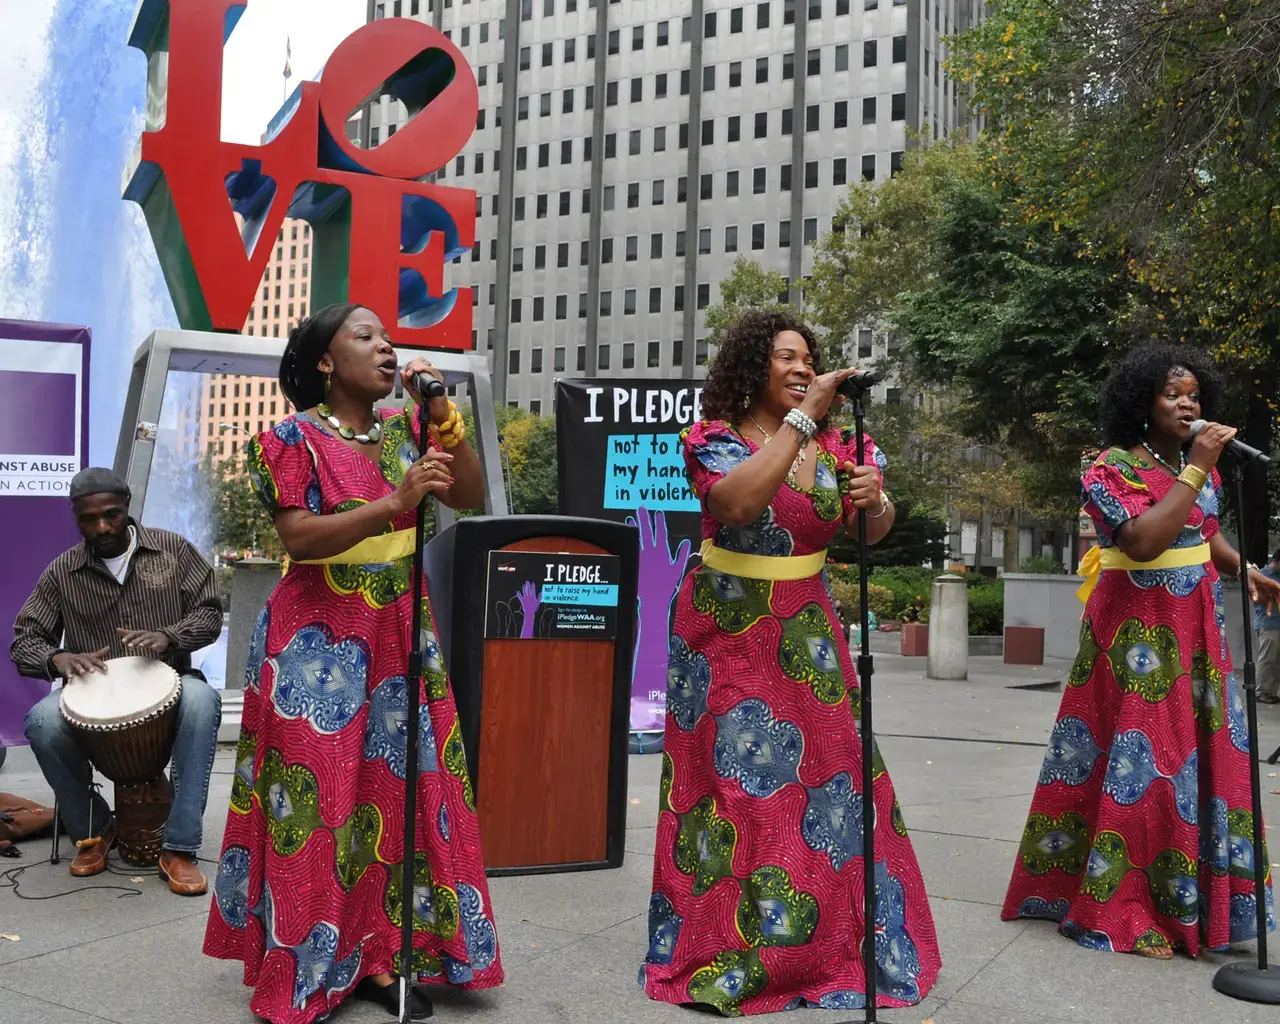 The Liberian Women&#39;s Chorus for Change at the Women Against Abuse Press Conference, Love Park, Philadelphia, October 2014. Photo by Leslie Macedo.